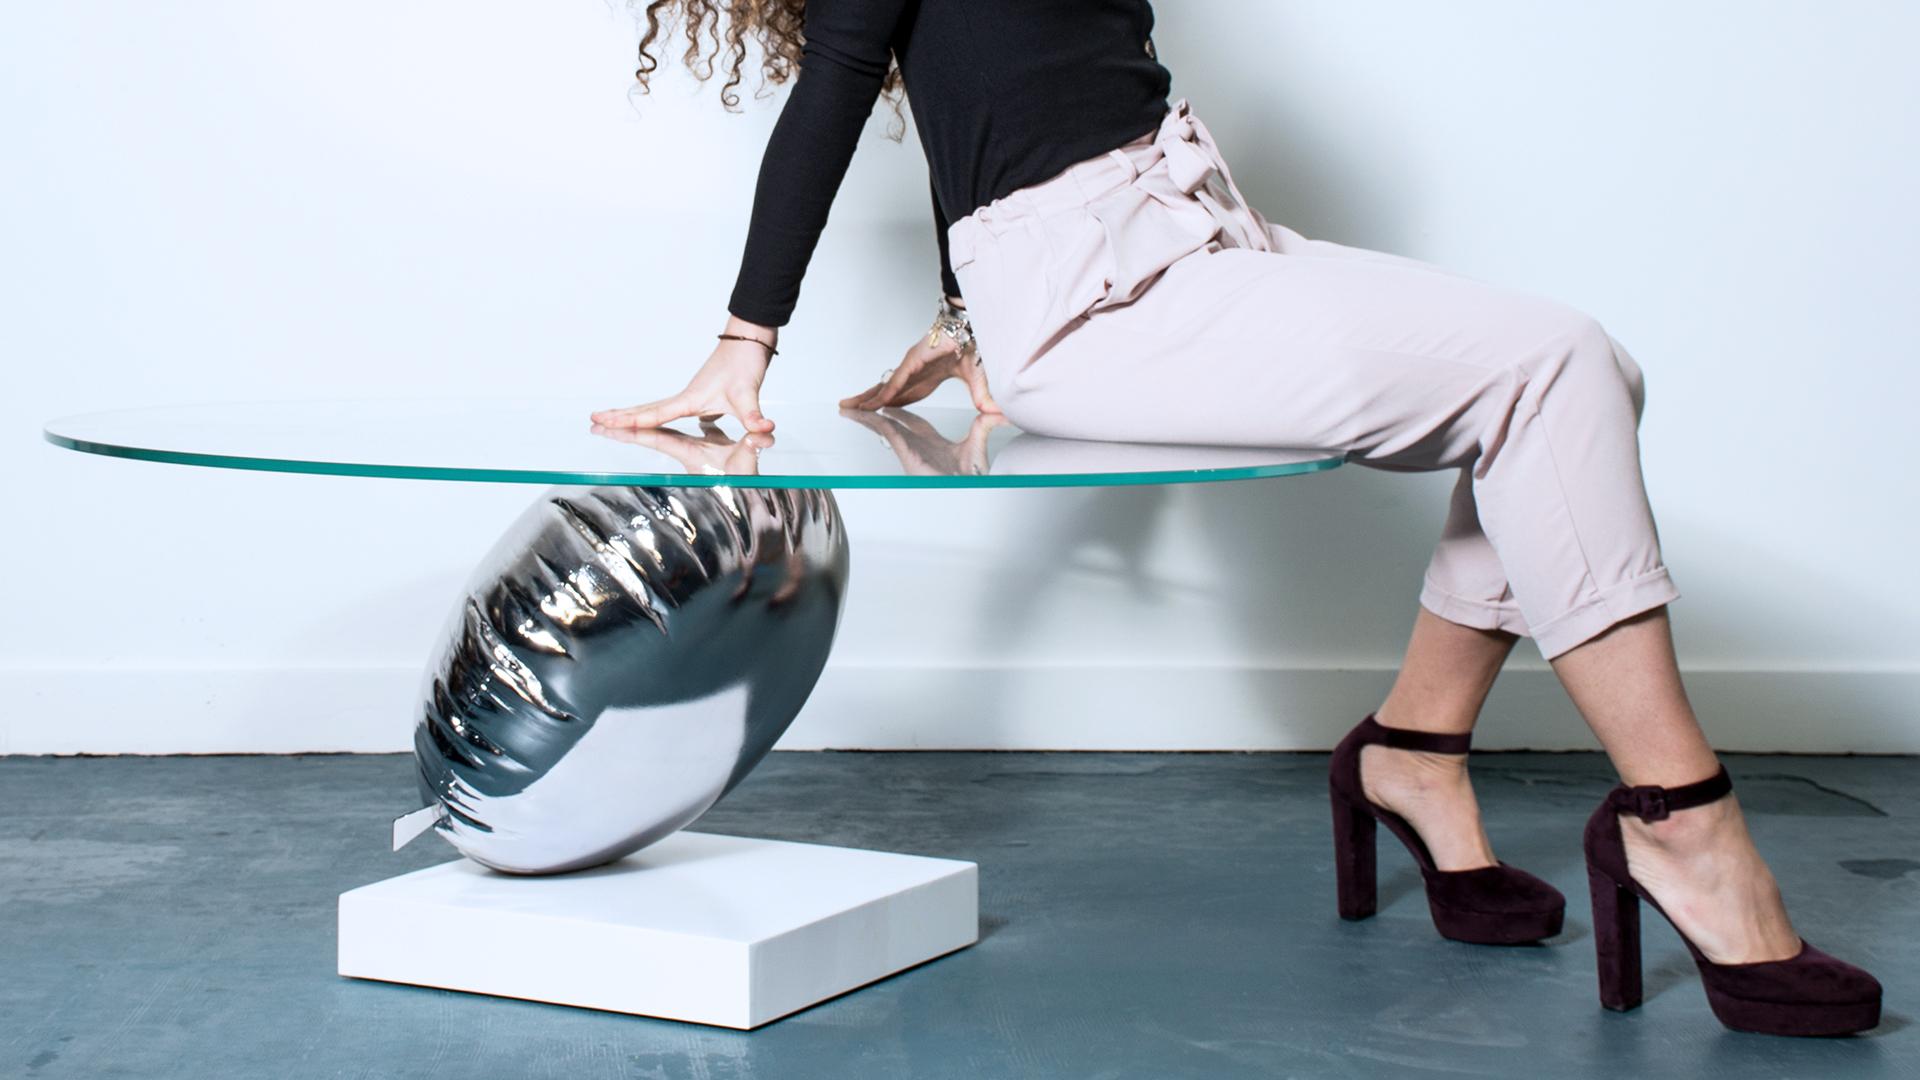 A modern furniture statement piece, the Balance coffee table by Duffy London.

A single silver Helium balloon standing on a thin white disc gives a playful trompe l’oeil, holding a large piece of glass at a perfectly level and balanced state, that